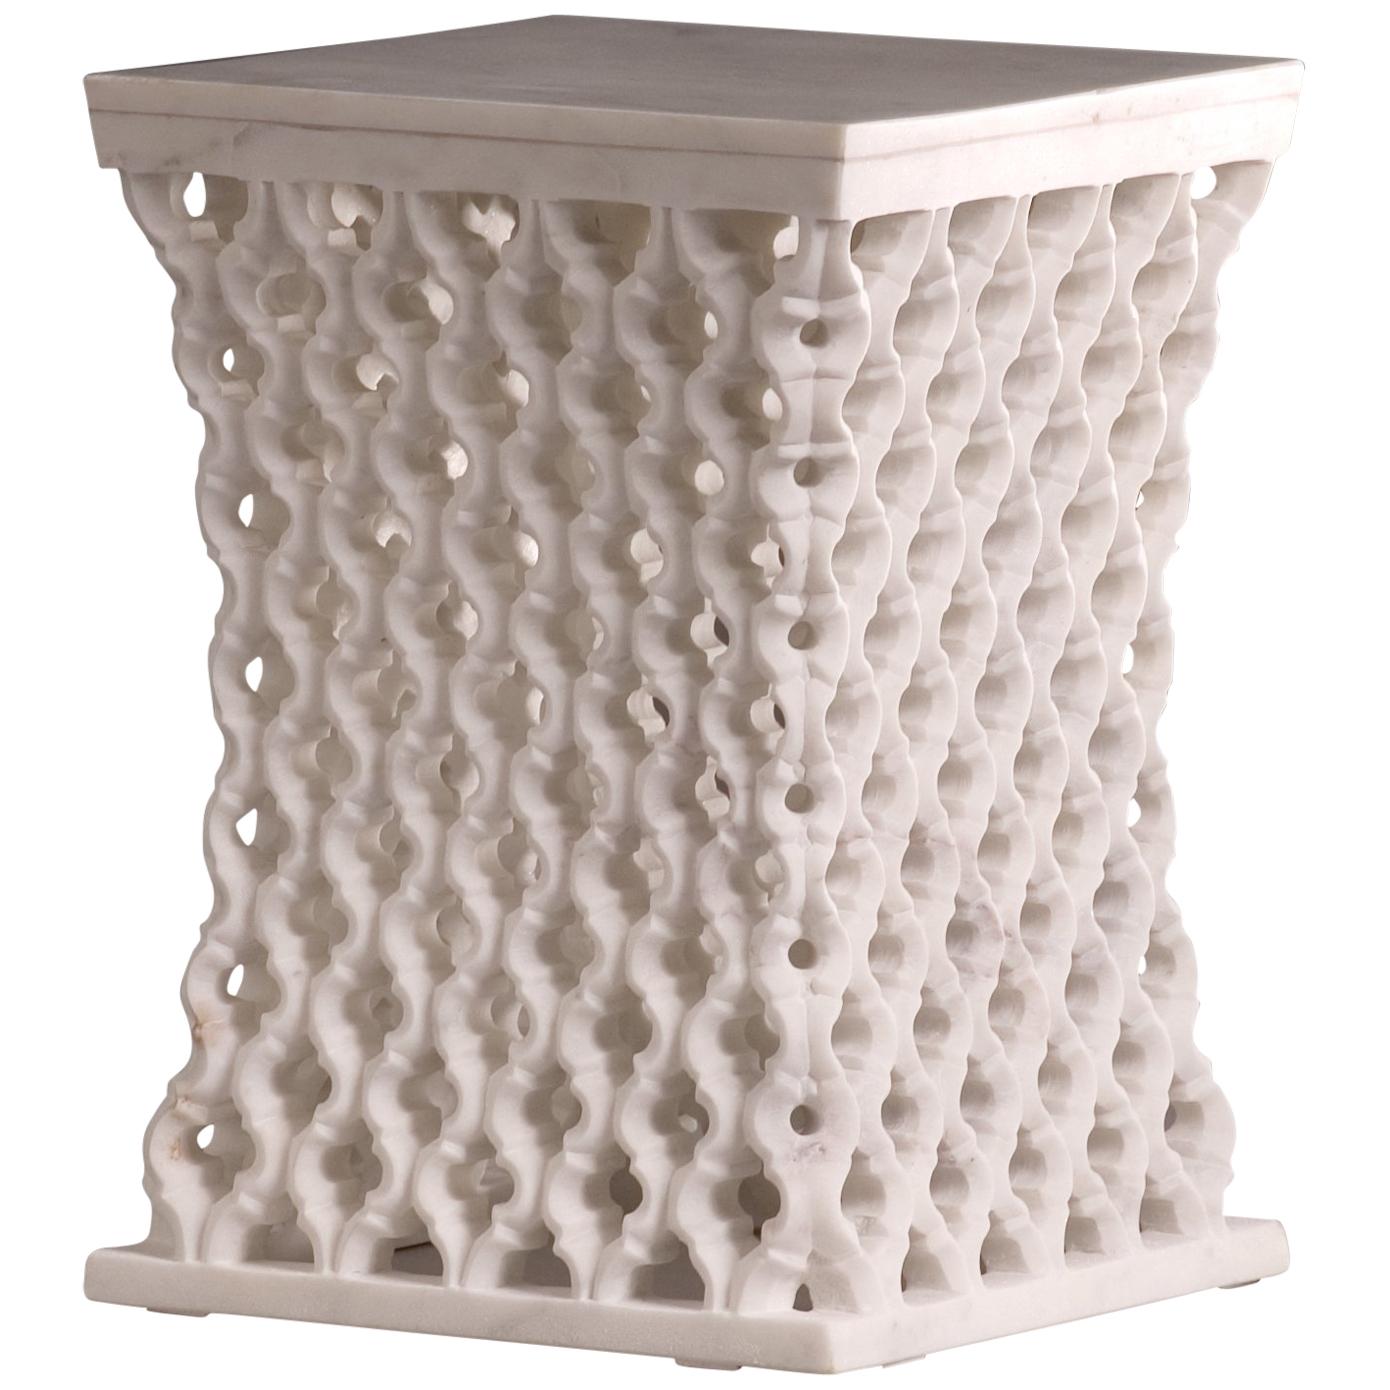 Marble side table by Paul Mathieu for Stephanie Odegard is inspired by the elegant pierced marble “Jali” screens and windows he saw in the palaces of Mughal India. This marble side table is a true piece of art and is handmade and hand carved in